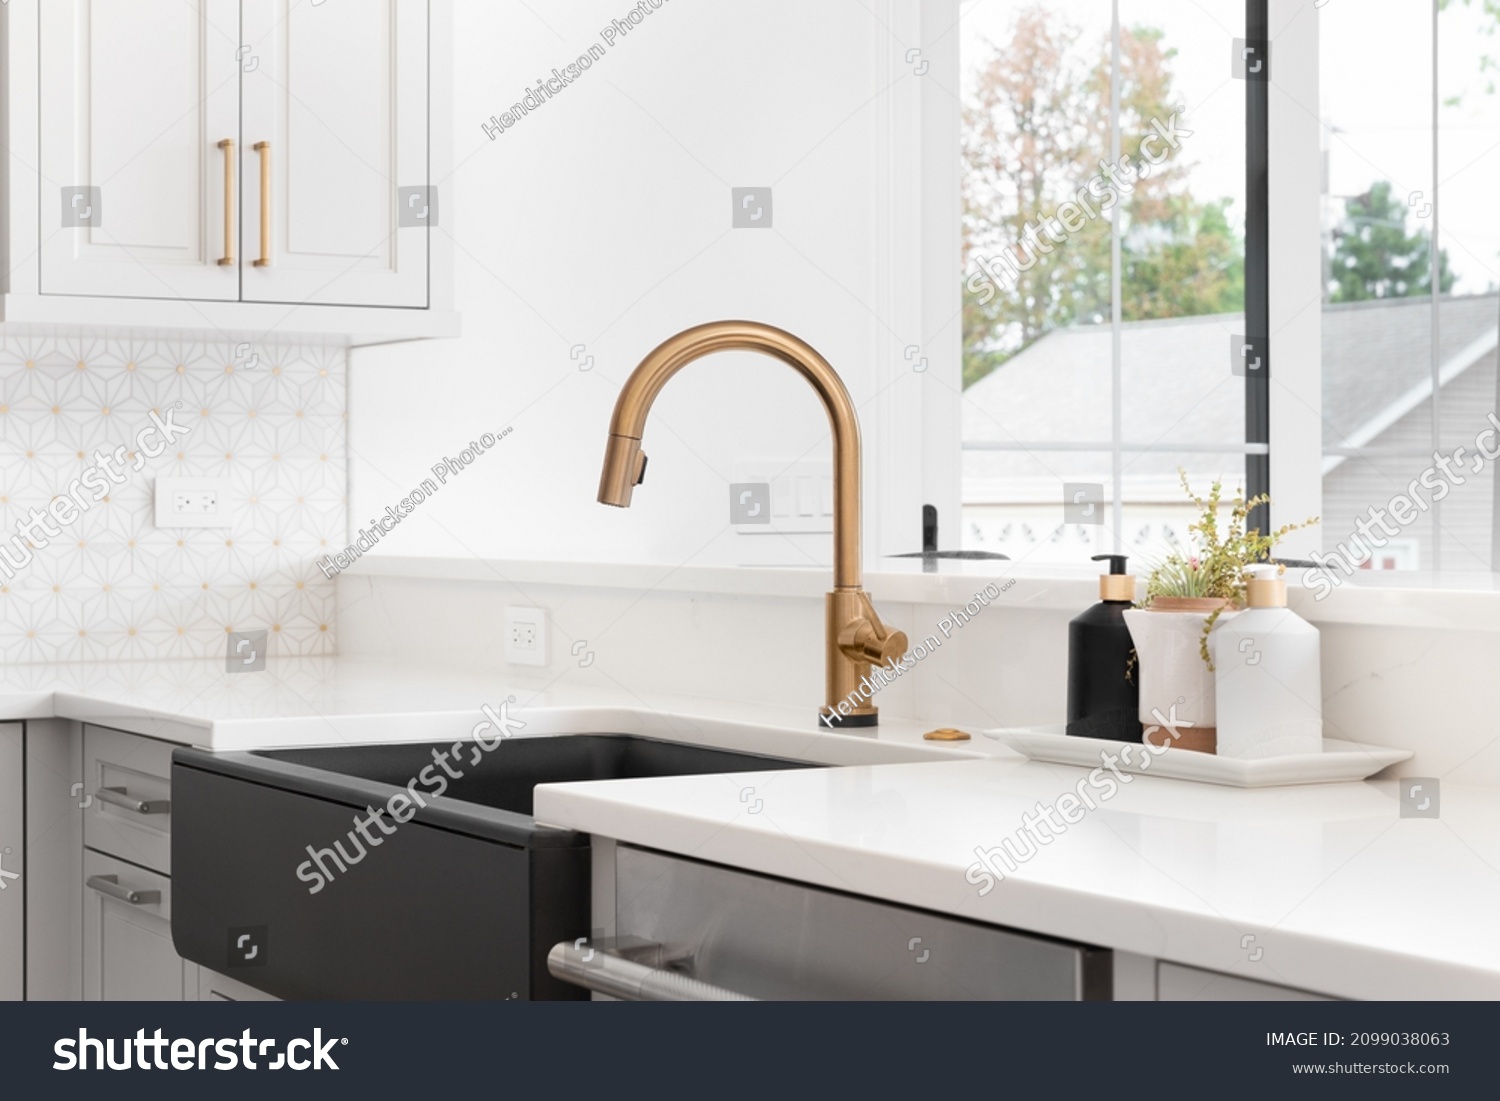 A beautiful sink in a remodeled modern farmhouse kitchen with a gold faucet, black farmhouse sink, white granite, and a tiled backsplash. No labels. #2099038063